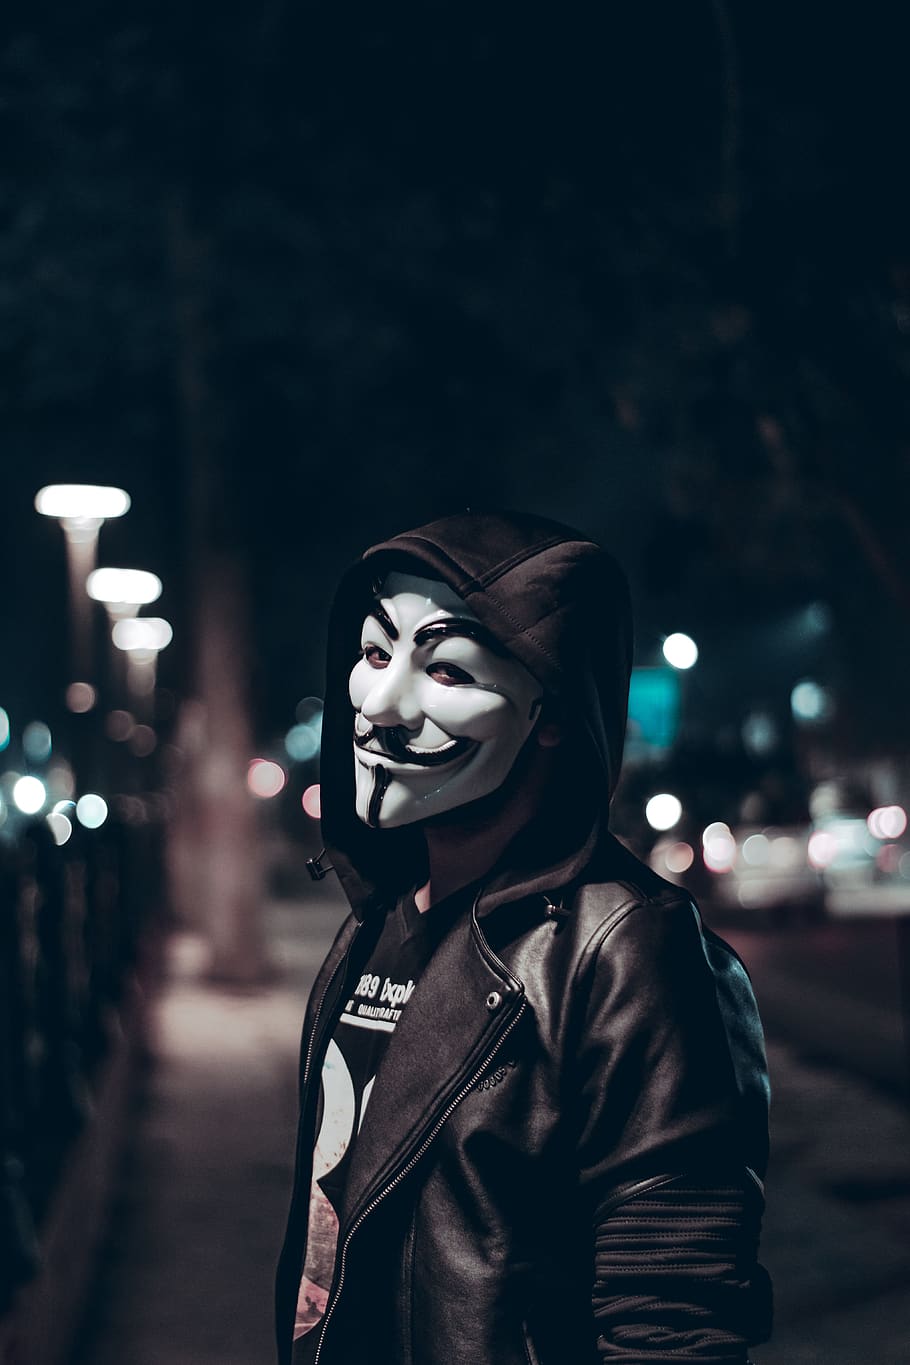 HD wallpaper: Person Wearing Guy Fawkes Mask, black leather jacket